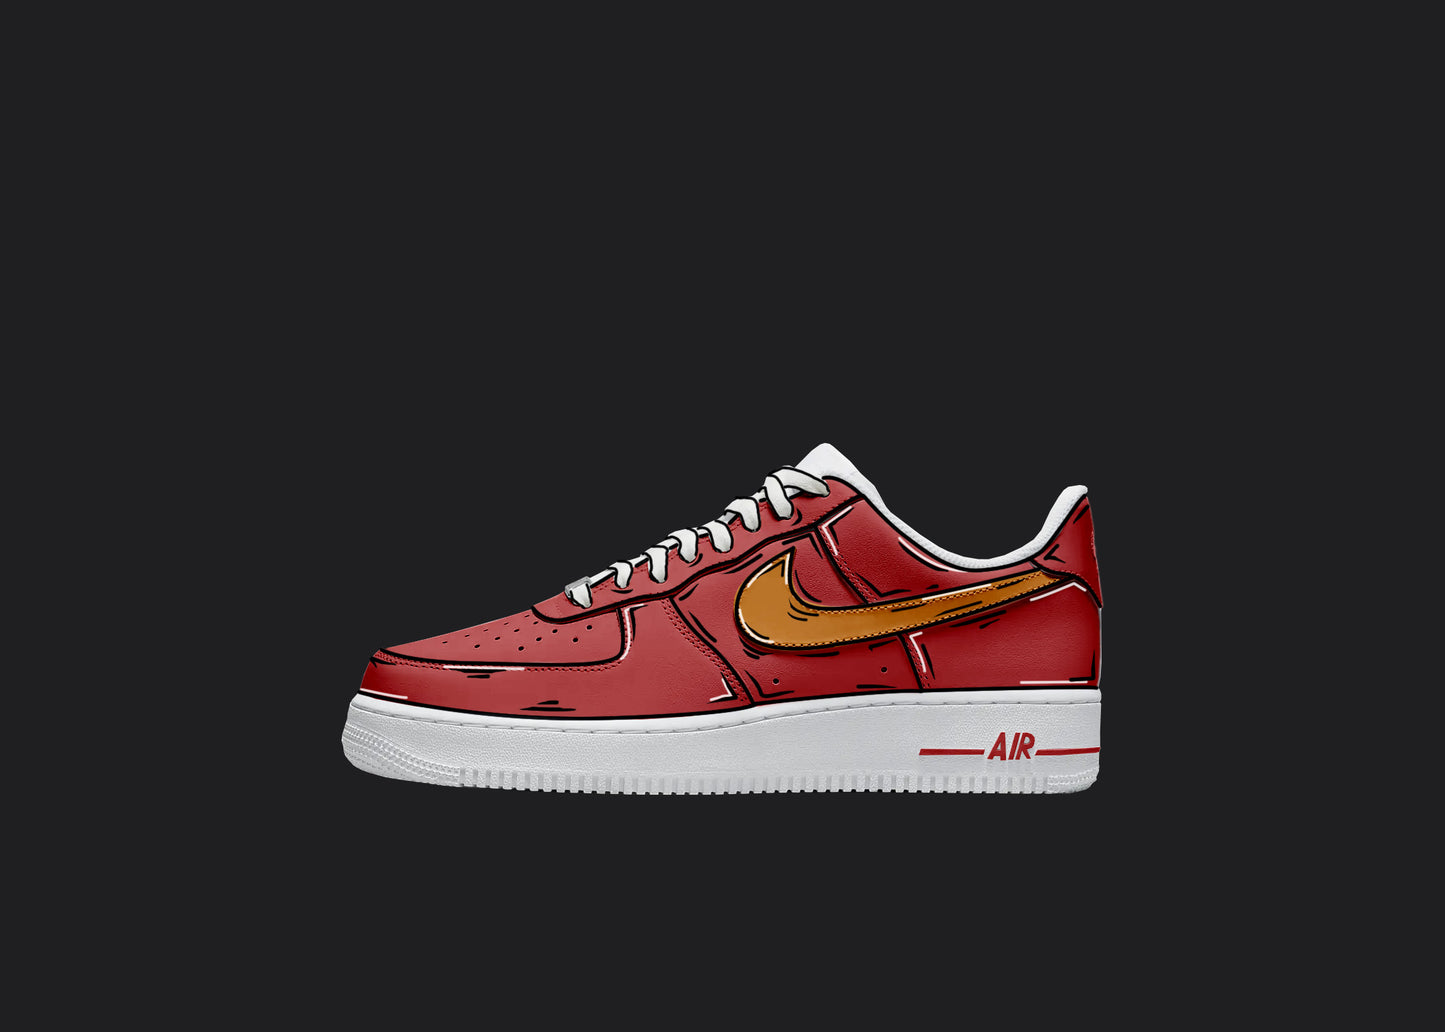 custo mair force 1 red and orange custom nike white lows with cartonish details all ove rthe sneaker 